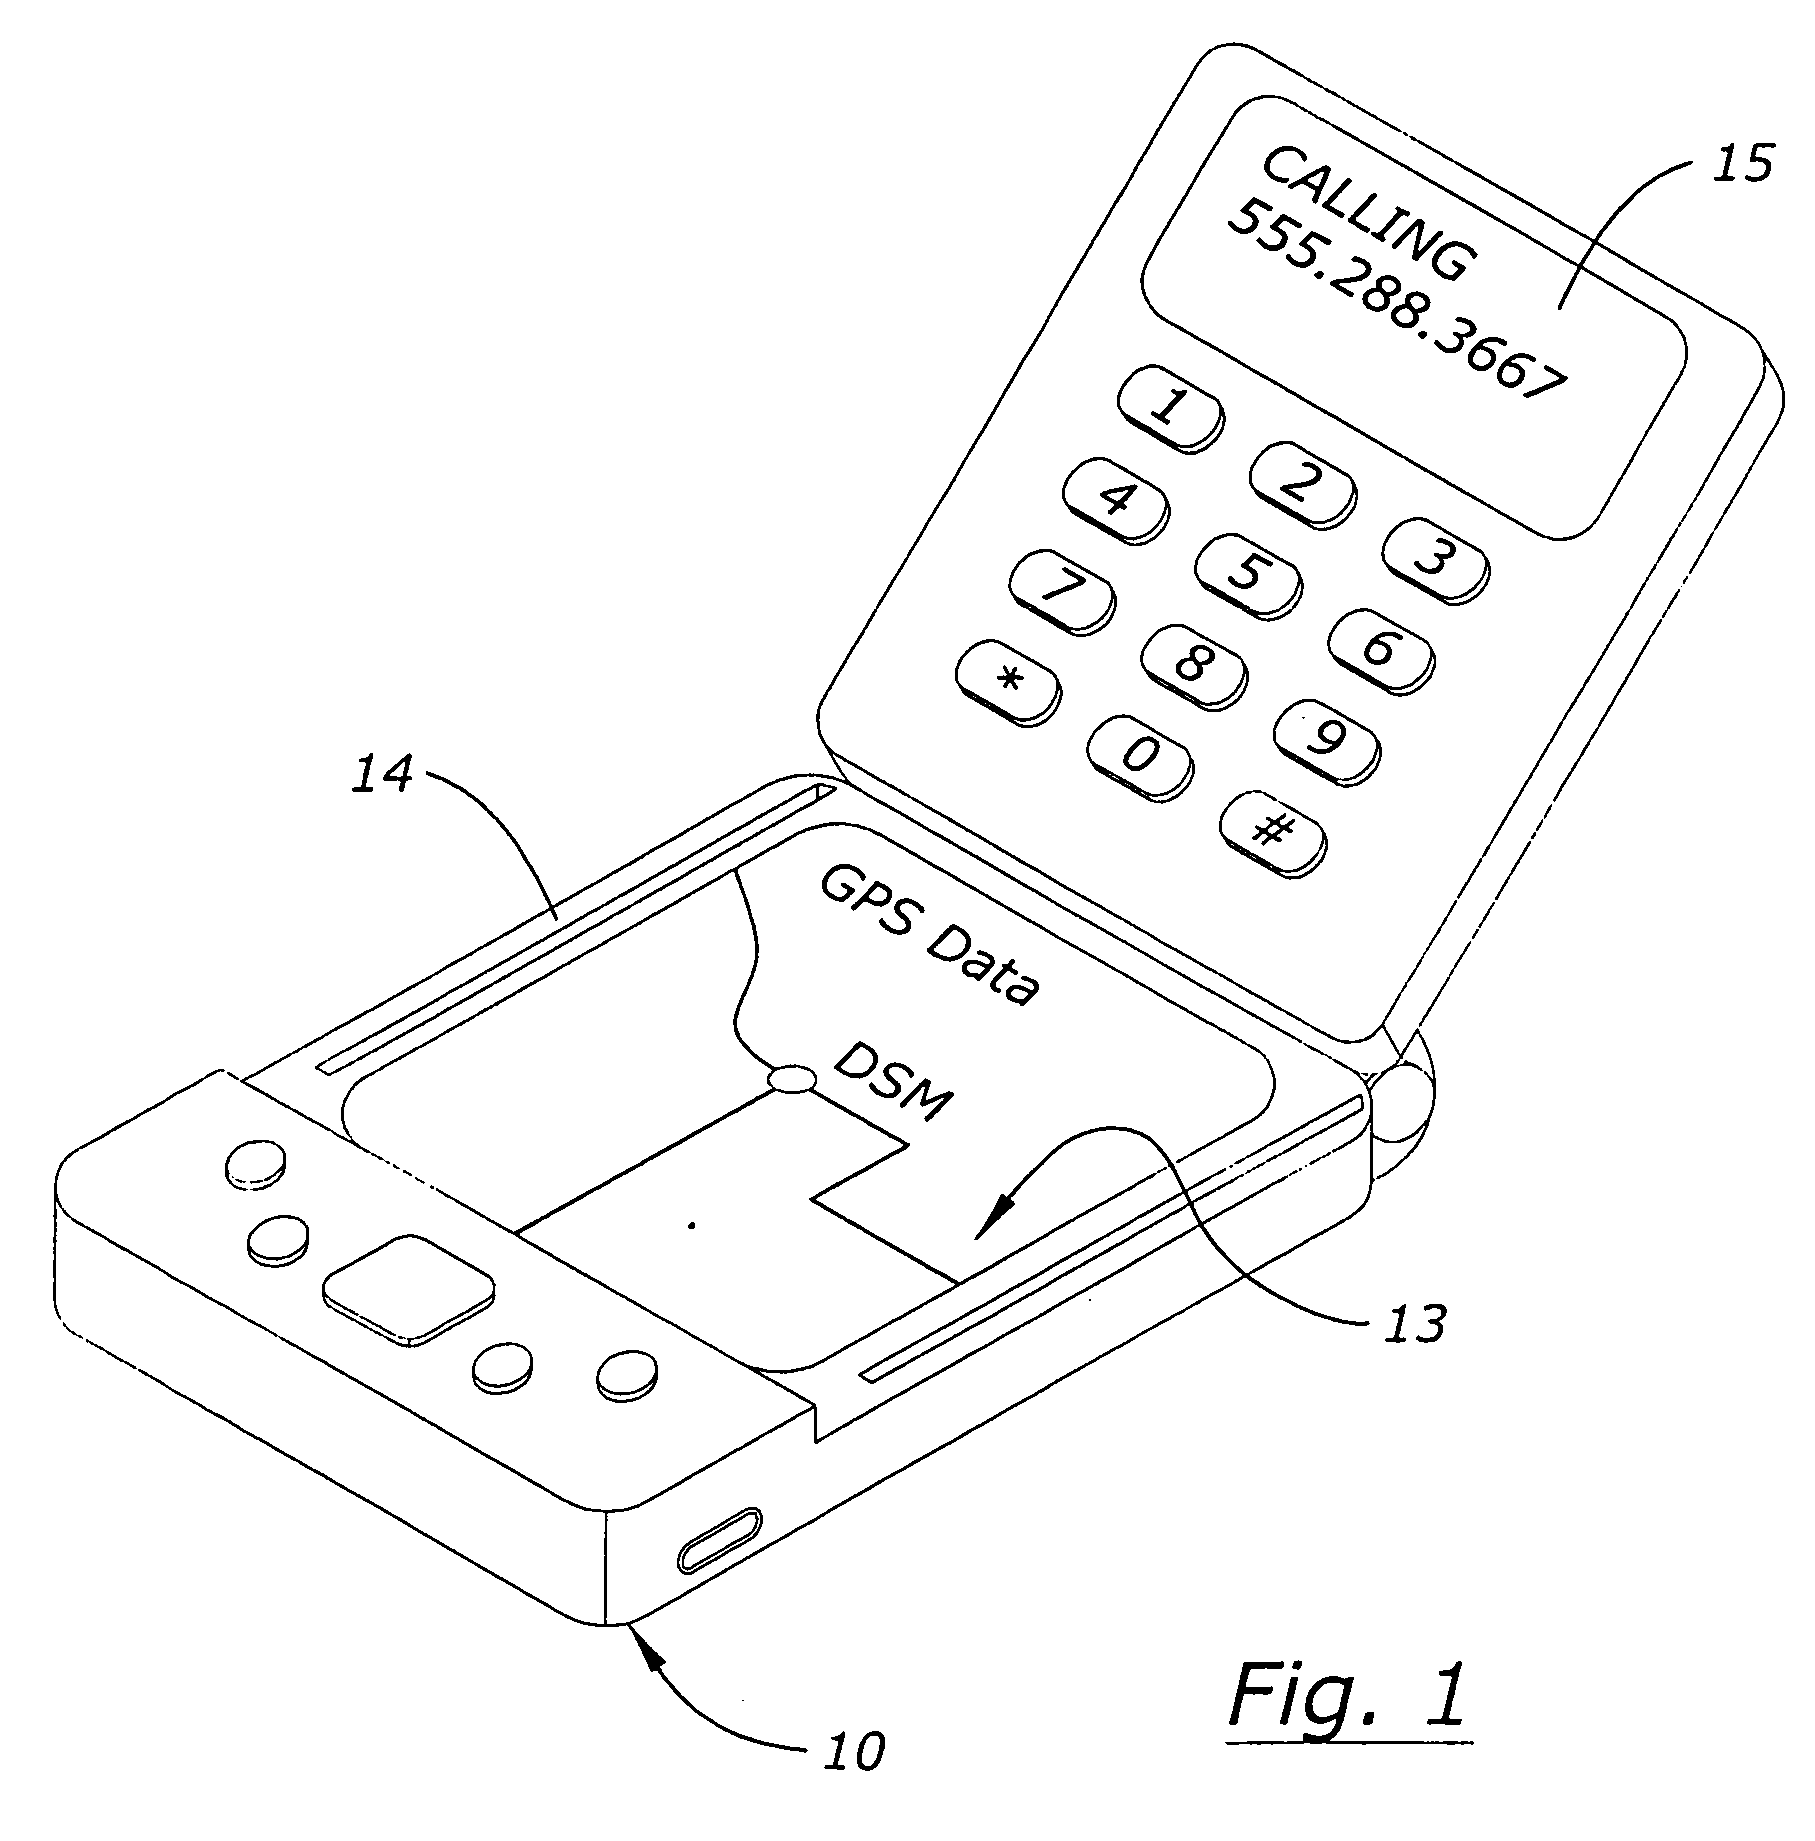 Cellular telephone, personal digital assistant with dual lines for simultaneous uses